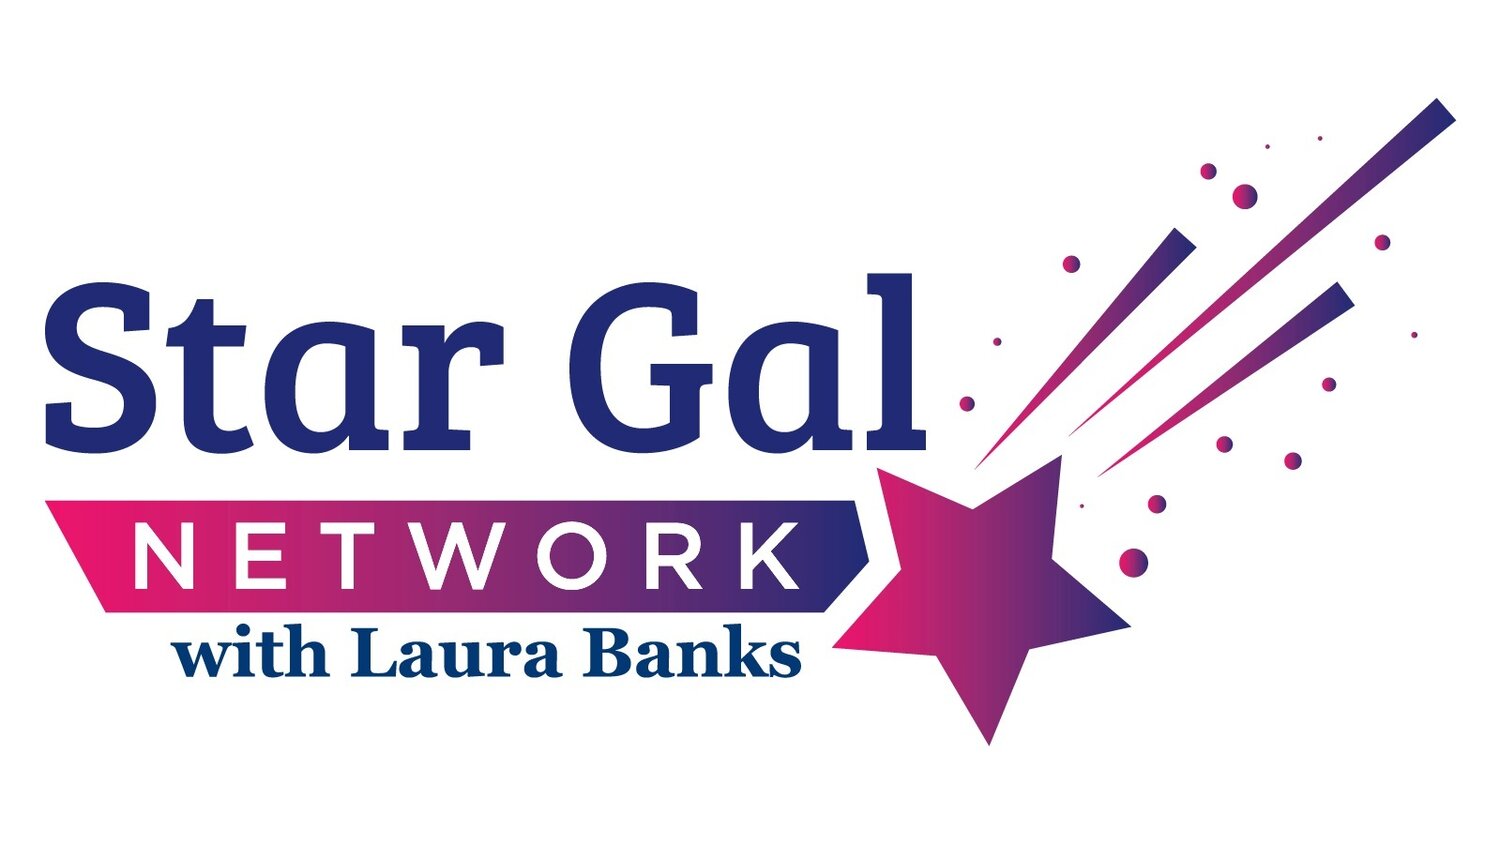 star gal HELPS YOU live your life with passion and purpose